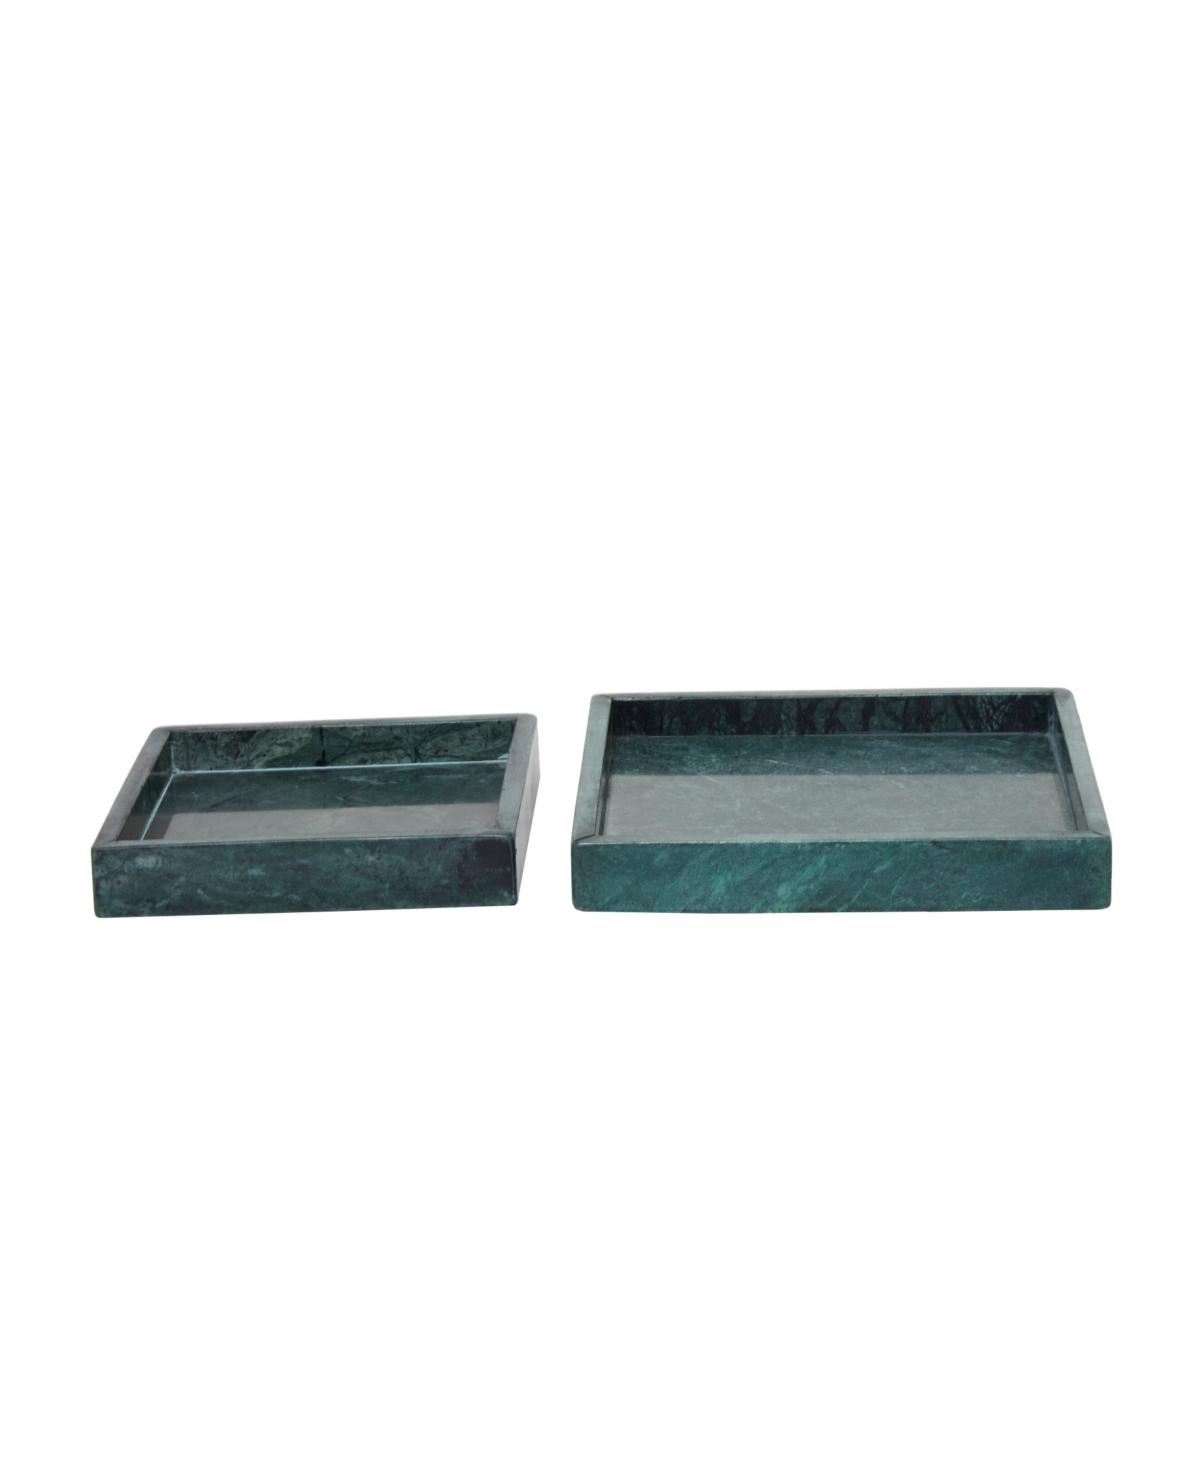 Rosemary Lane Marble Tray With Raised Border, Set Of 2, 10", 8" W In Green